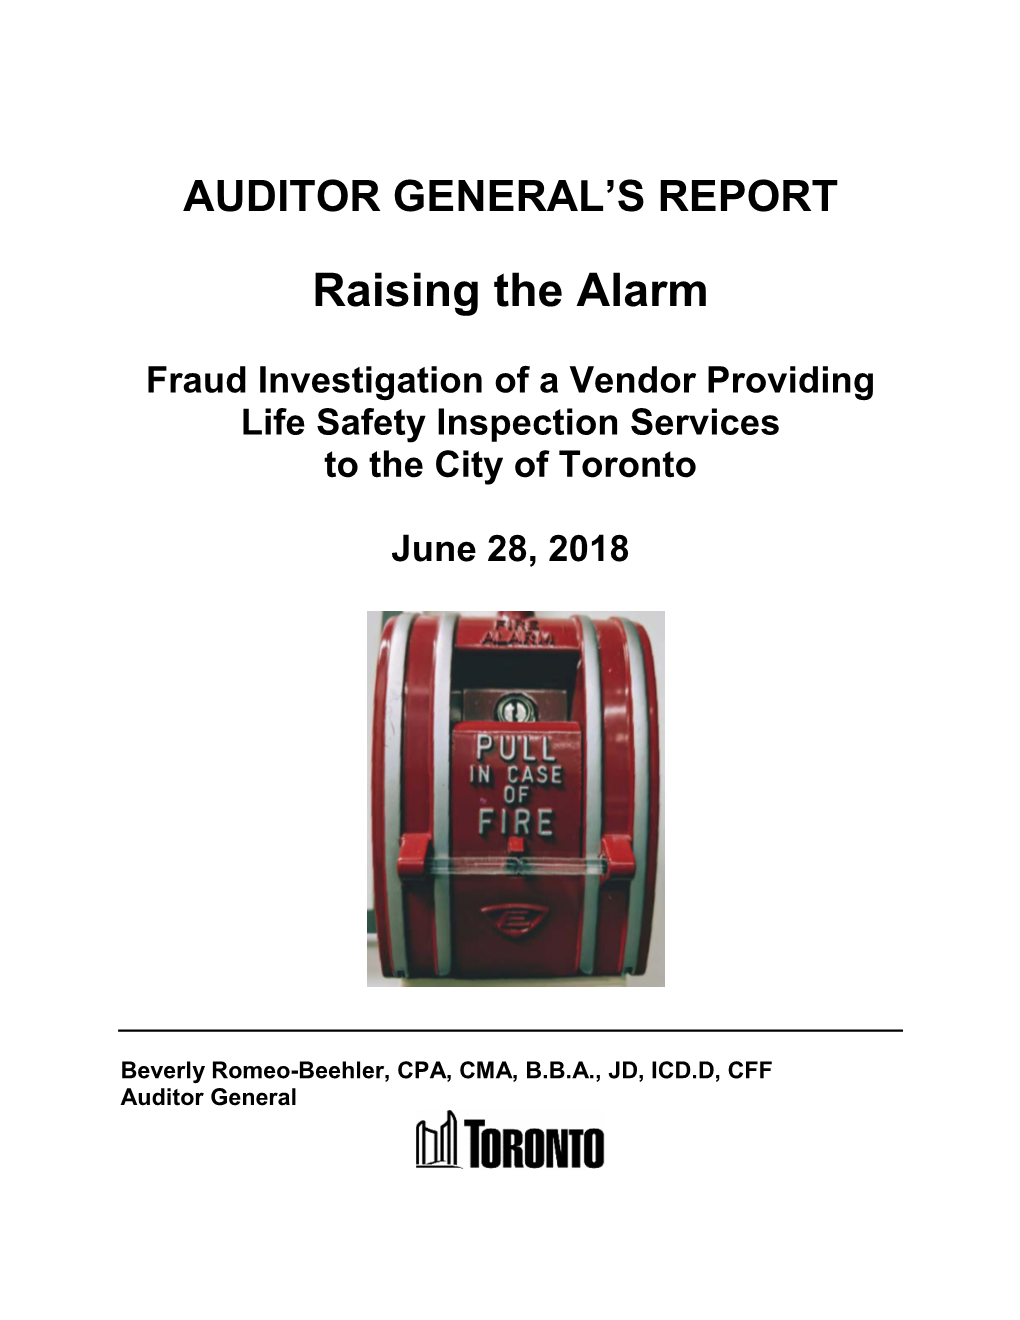 Fraud of Fire Safety Company Auditor General Report June 28 2018